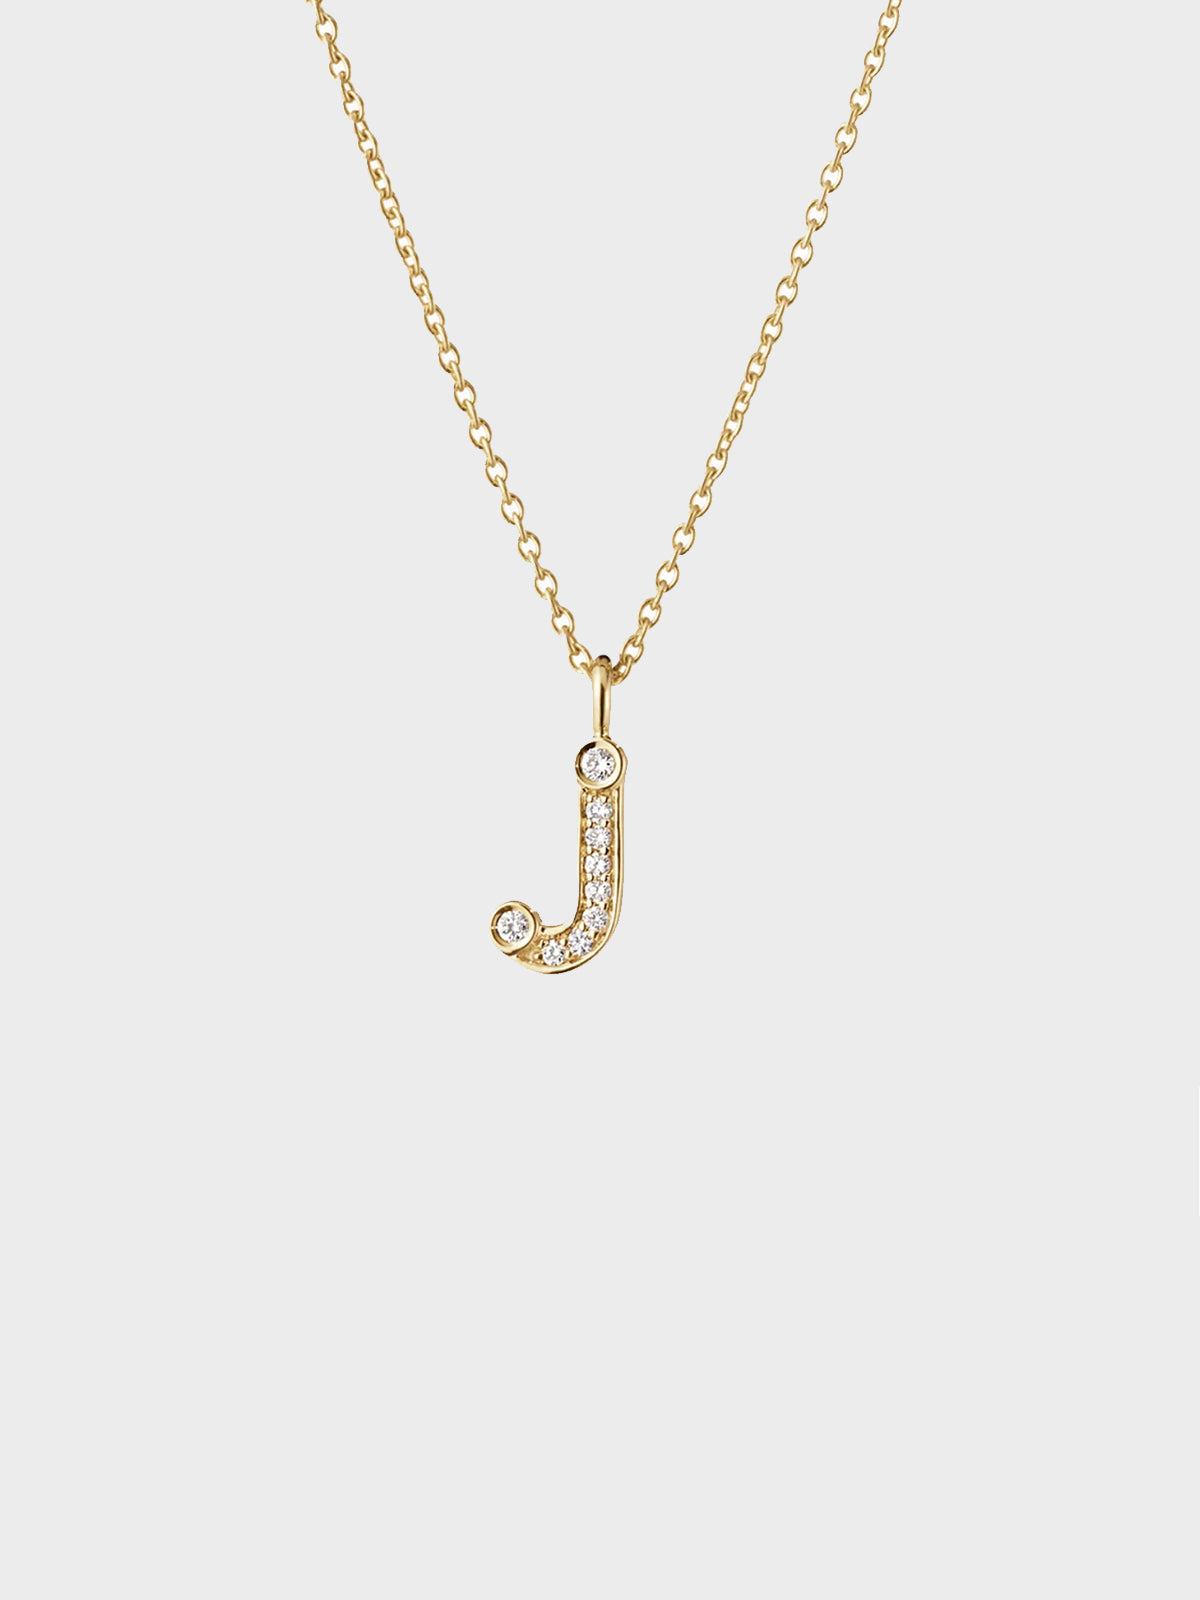 Sophie Bille Brahe - SIMPLE J NECKLACE IN 18K YELLOW GOLD